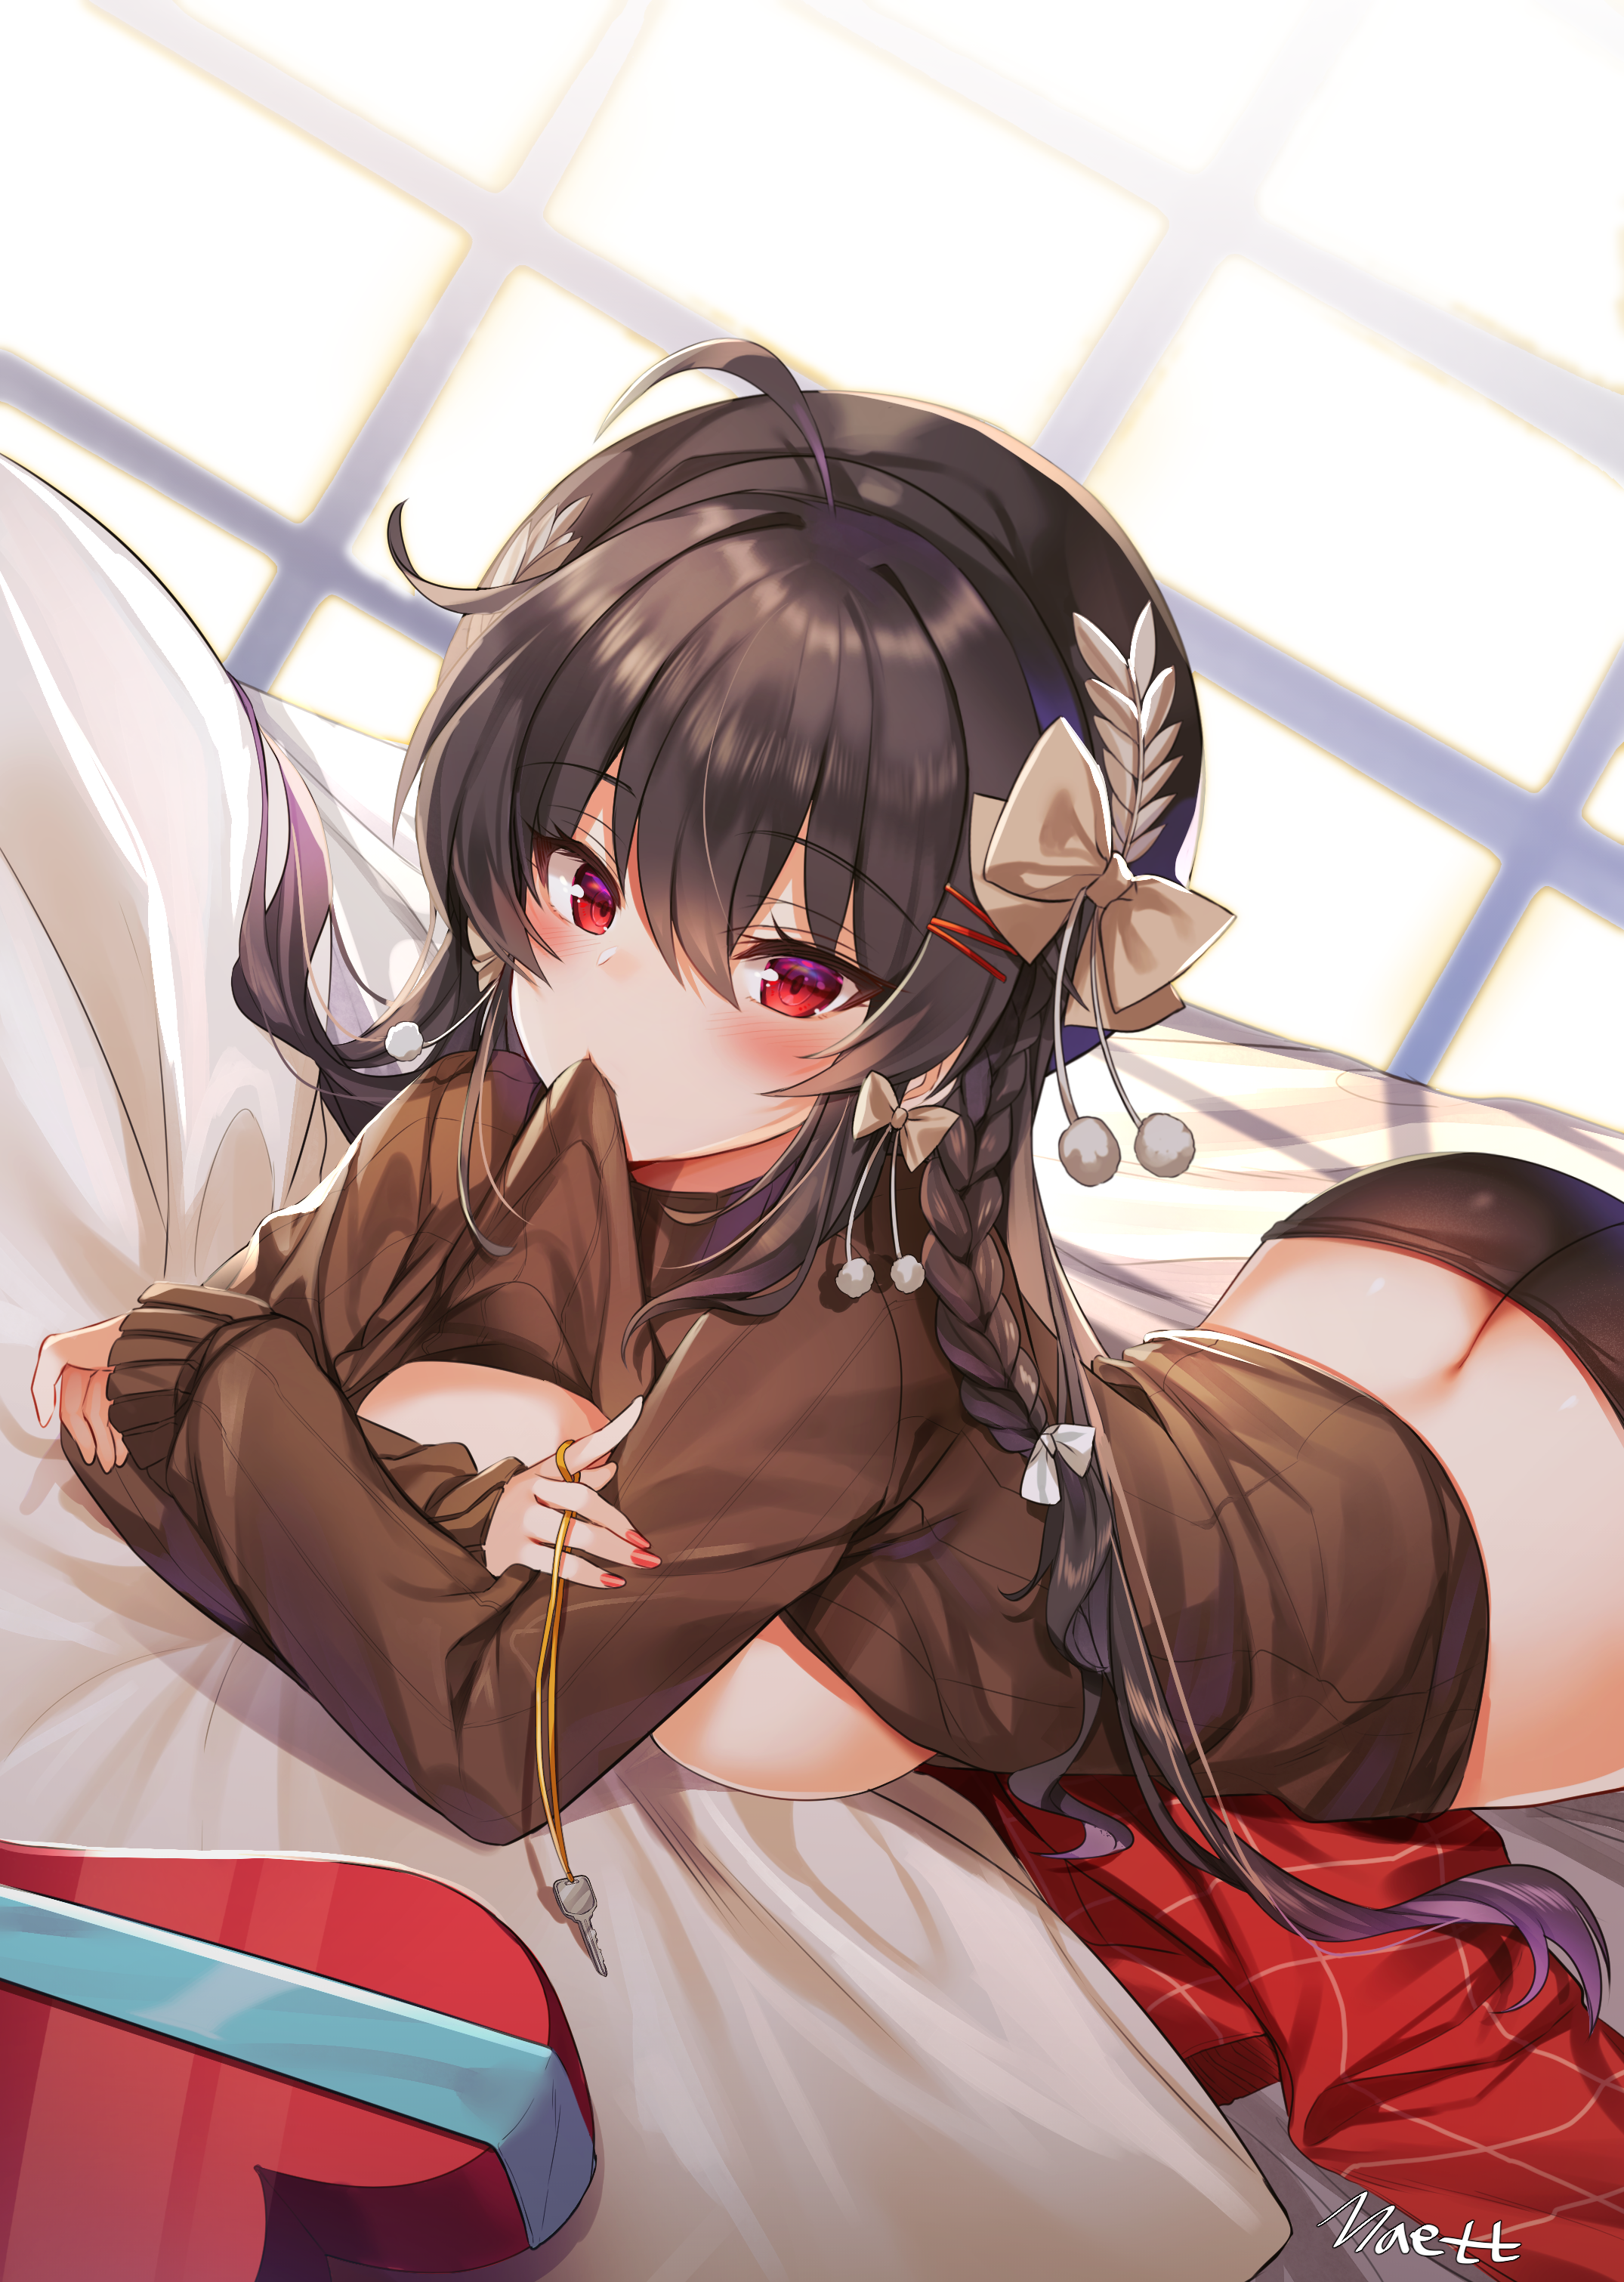 Anime 2150x3021 red eyes anime nails looking at viewer blushing hair accessories Iris Yuma (Soul Worker) Soul Worker Maett artwork anime girls brunette braids lifting shirt boobs lying on front ass